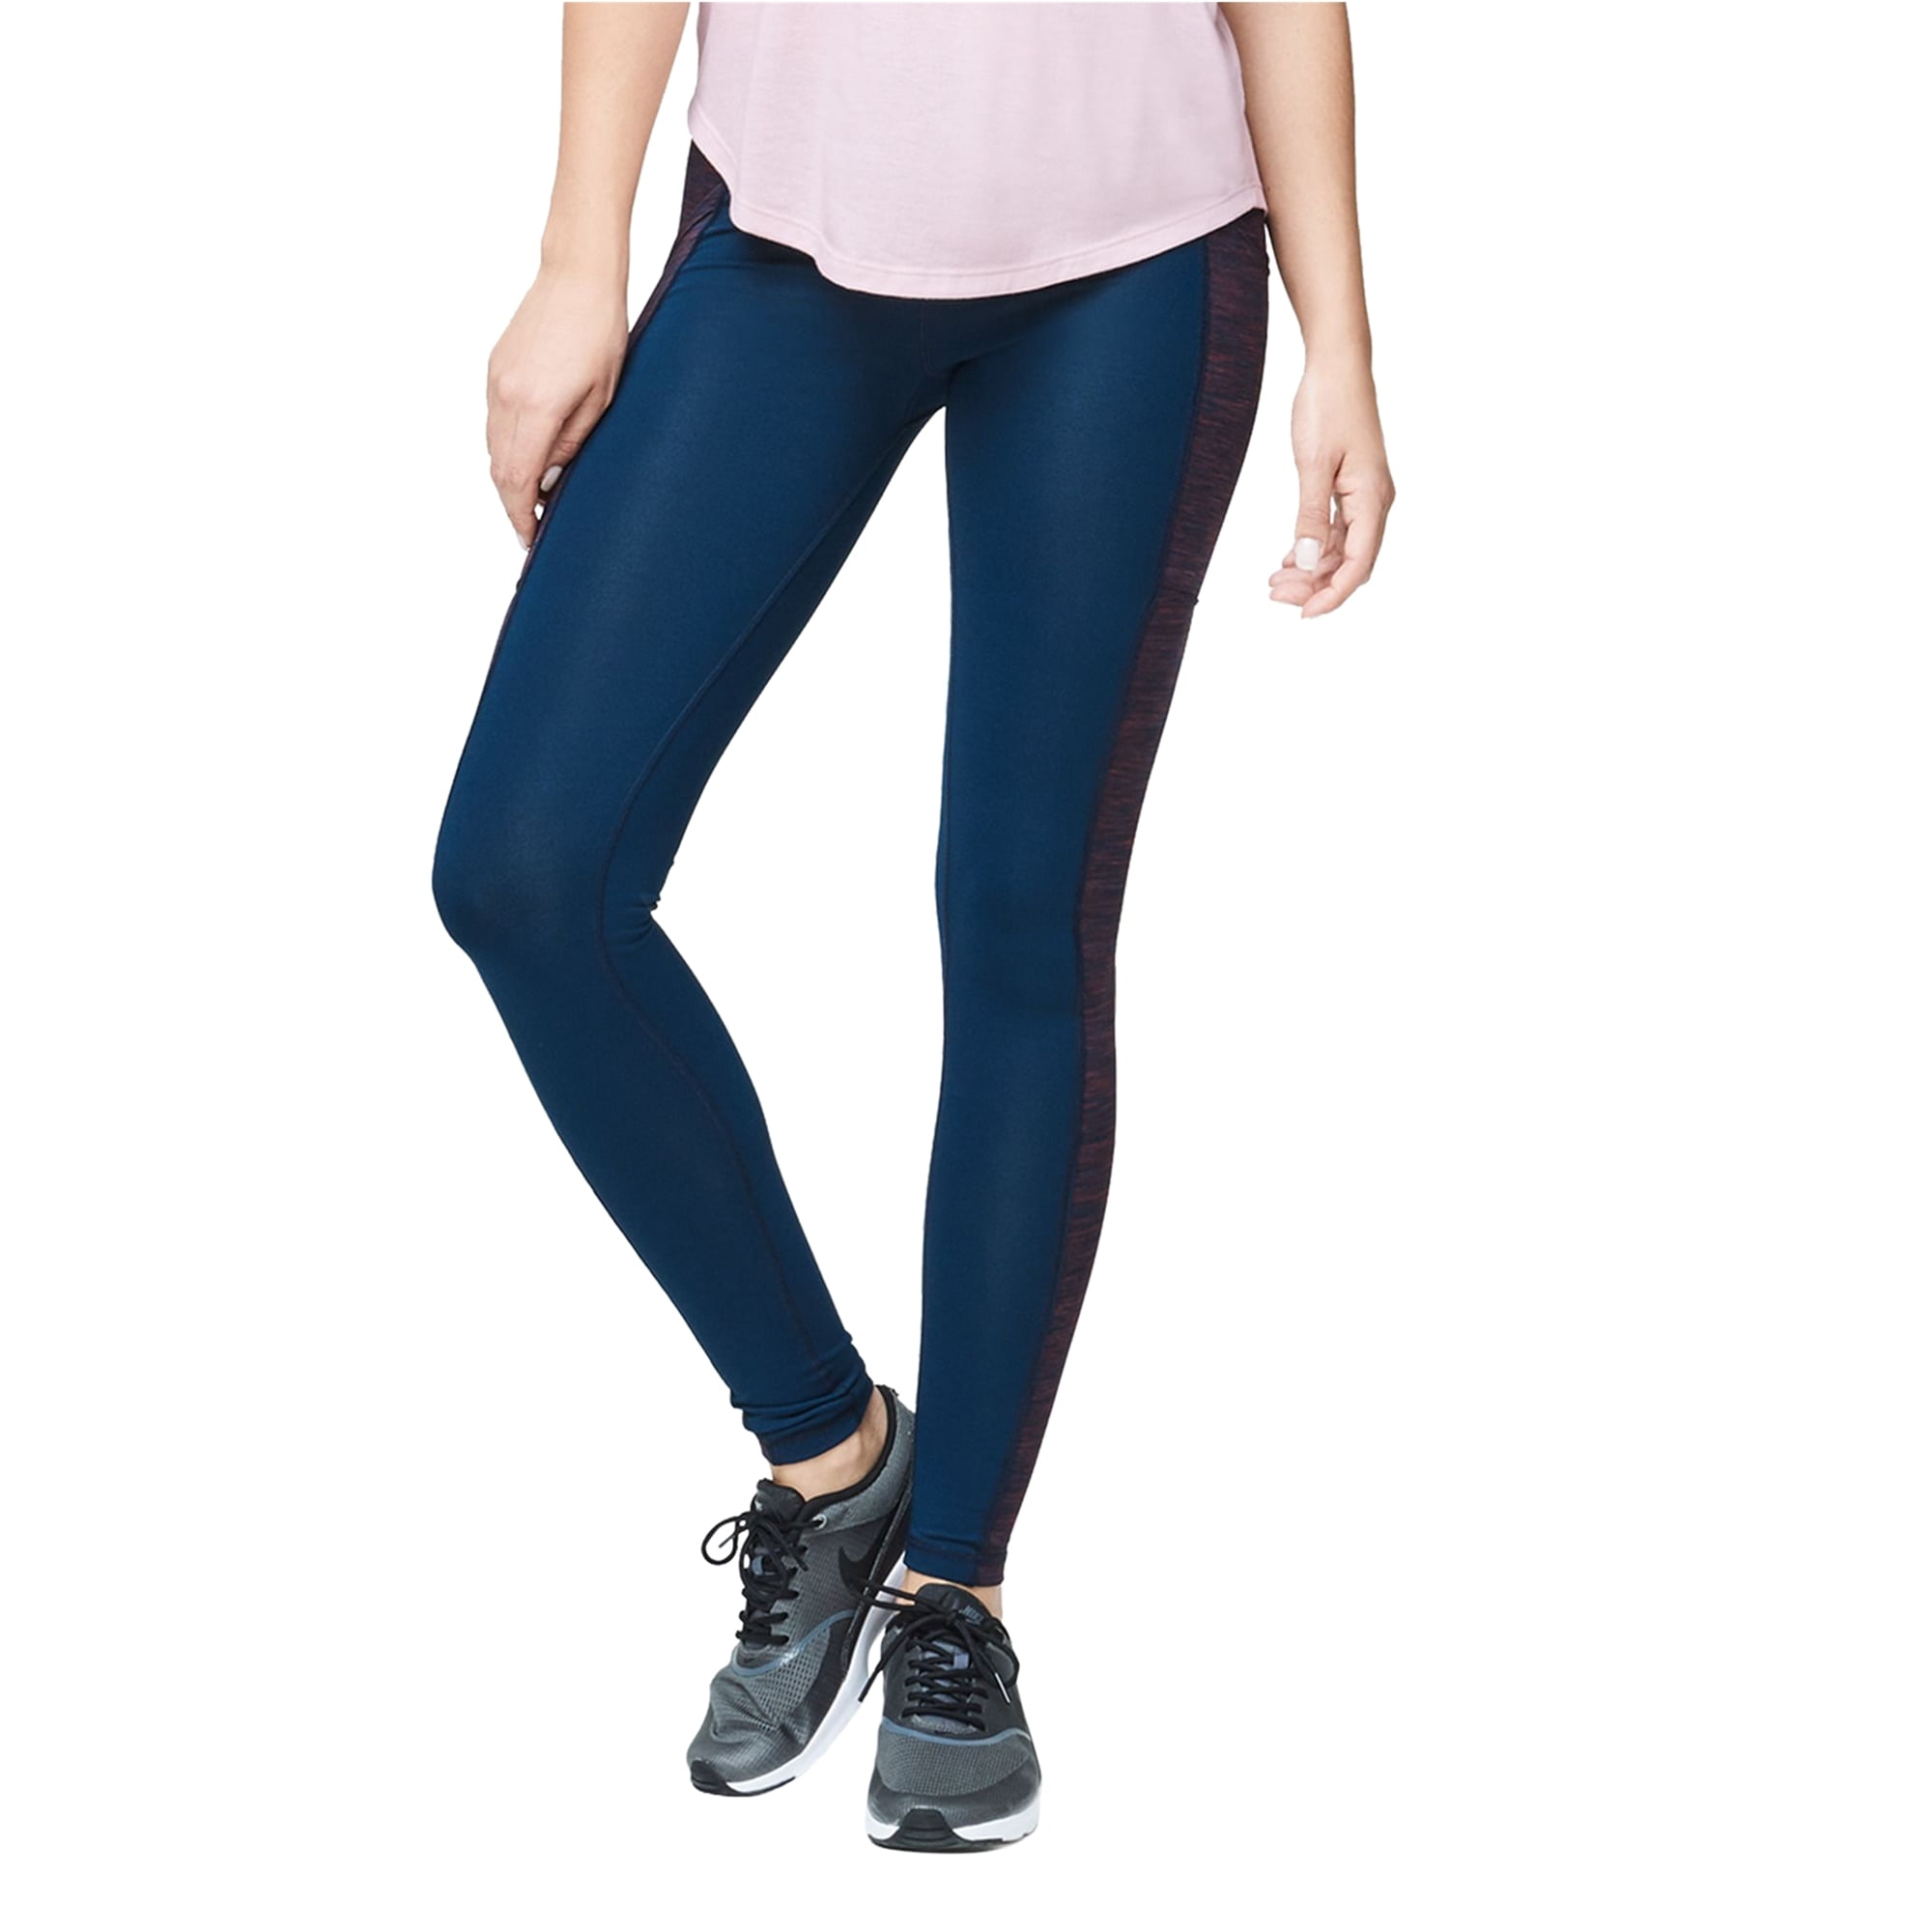 30 Minute Aeropostale Workout Pants for Gym